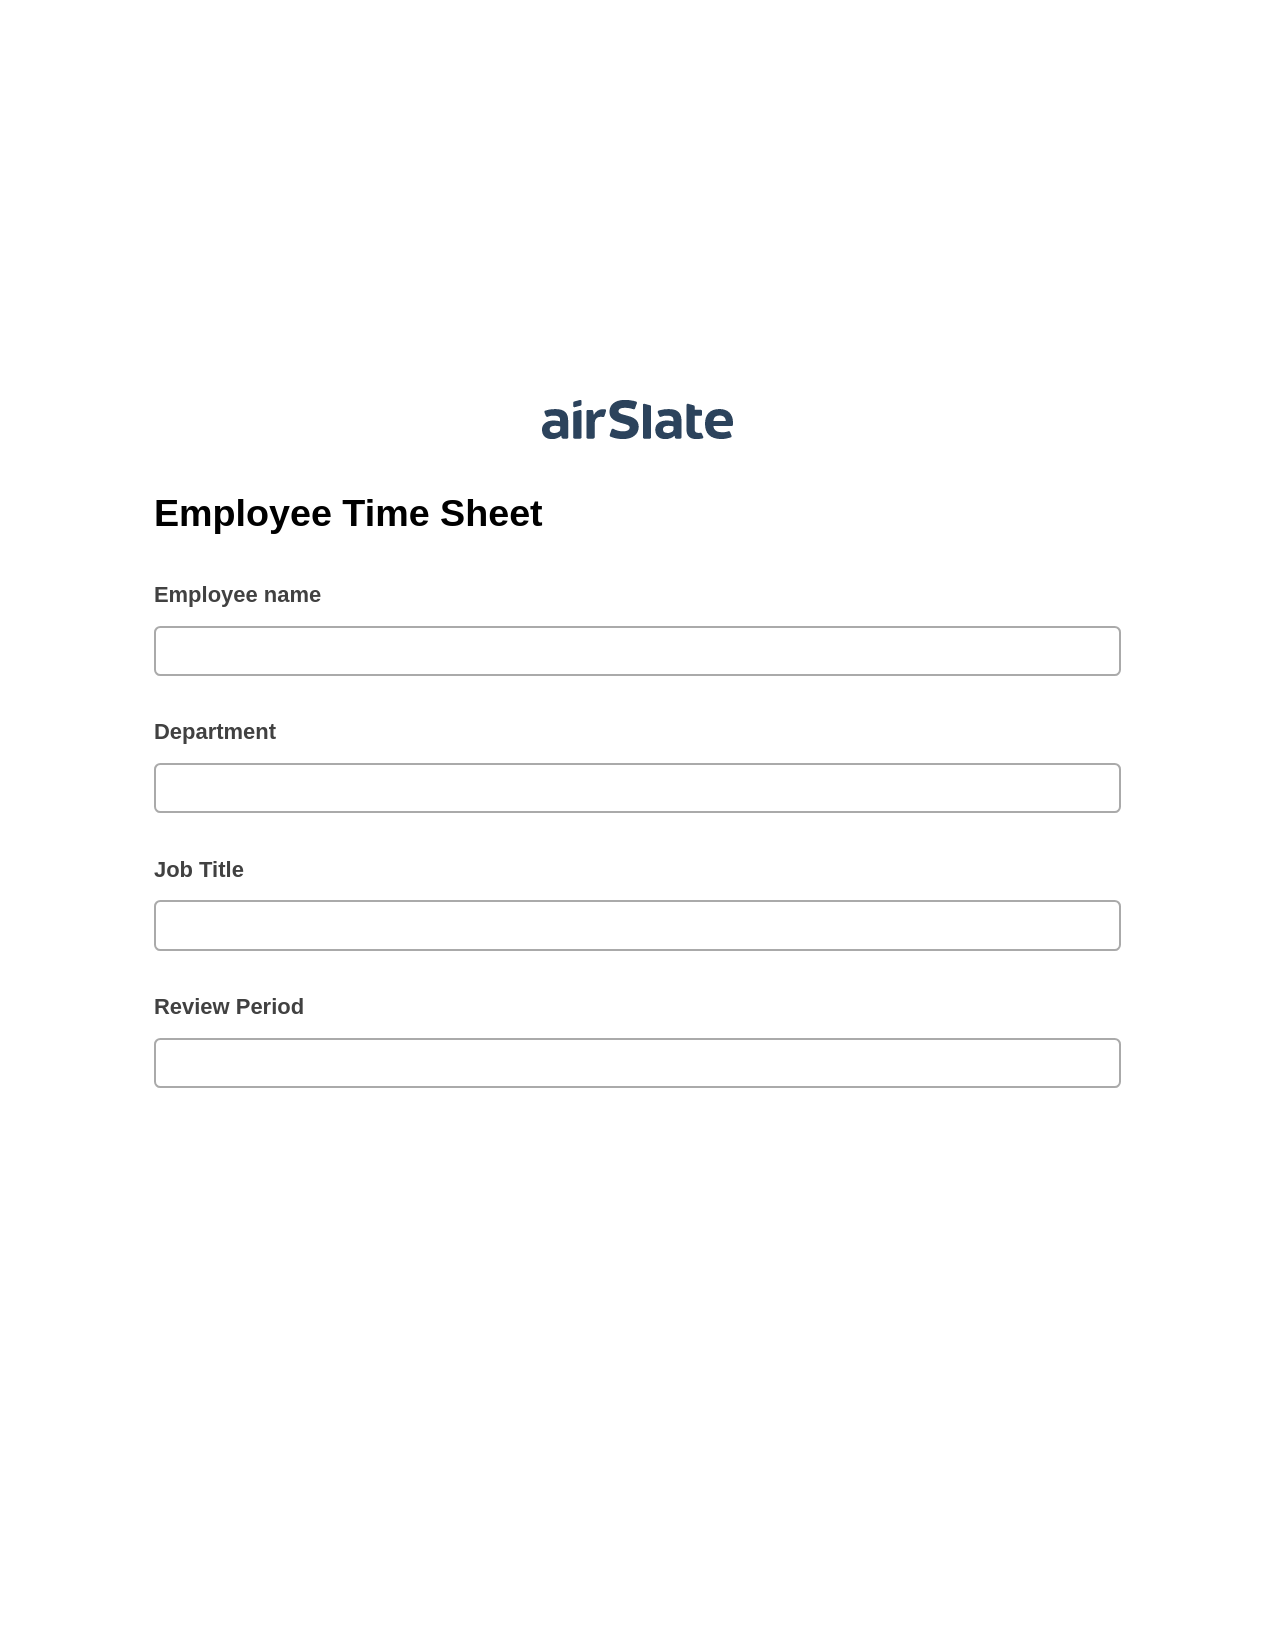 Multirole Employee Time Sheet Pre-fill from Salesforce Records with SOQL Bot, Google Cloud Print Bot, Text Message Notification Postfinish Bot